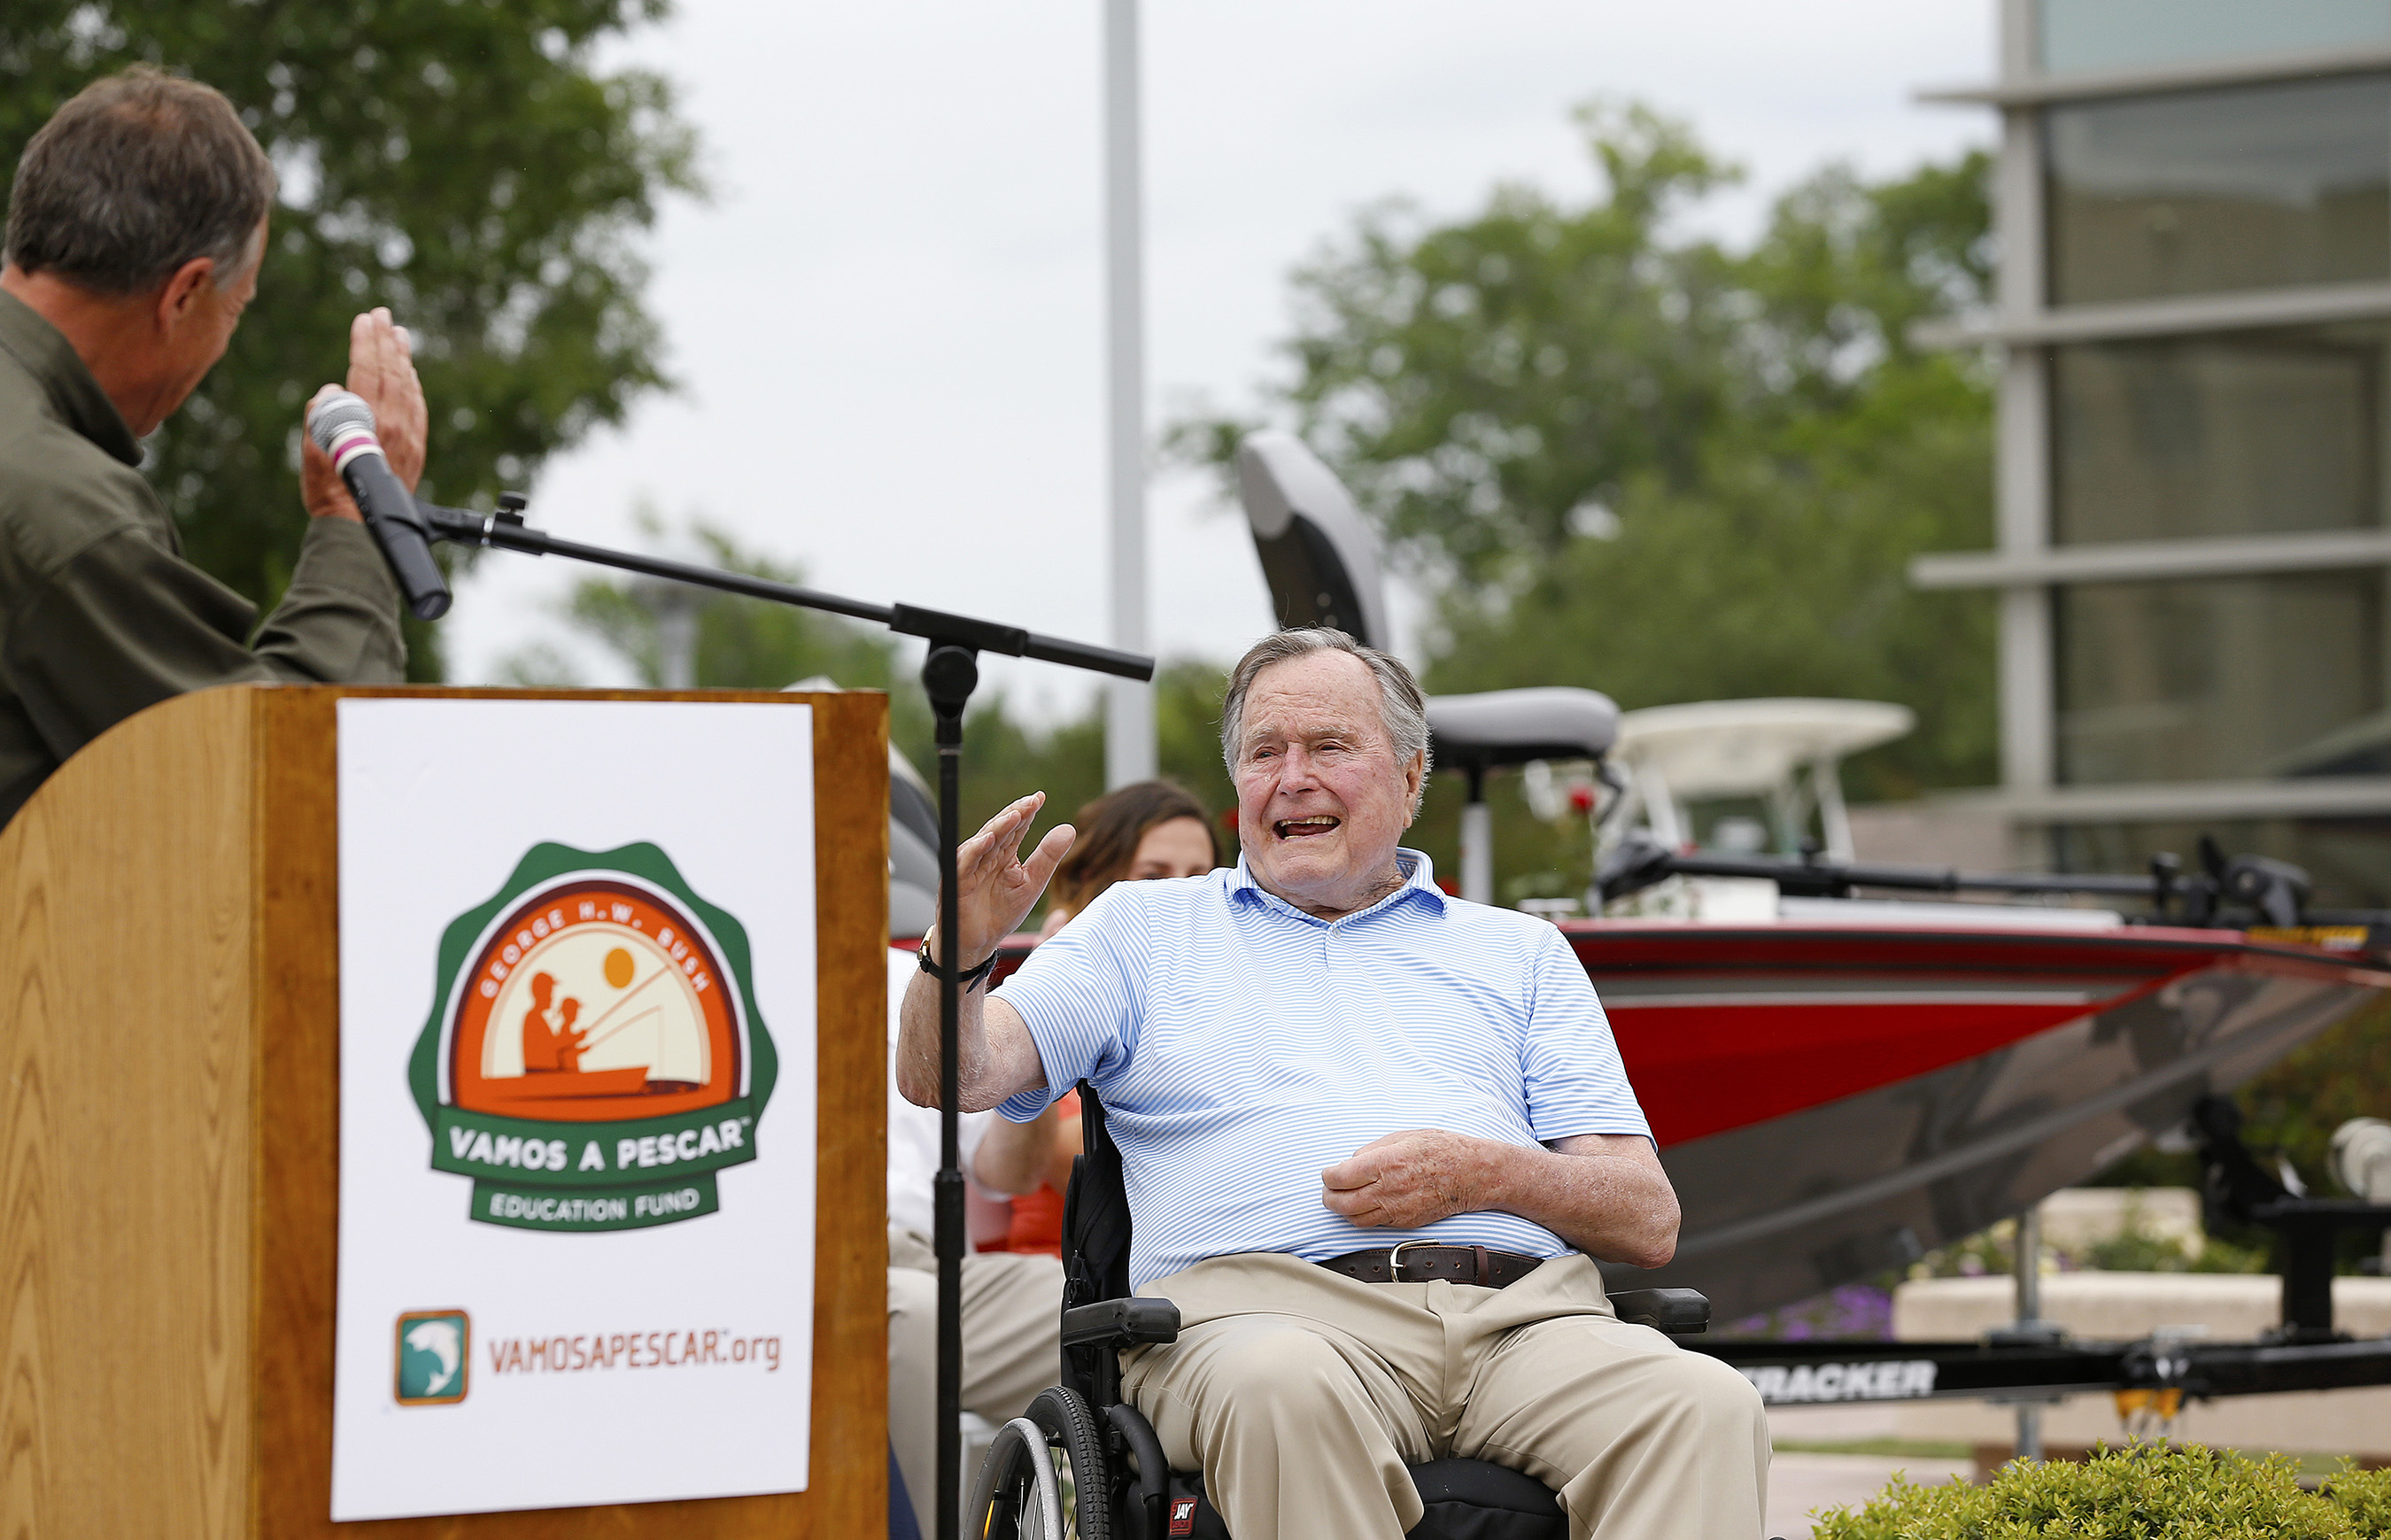 Johnny Morris, Founder and CEO of Bass Pro Shops, left, salutes President George H.W. Bush for his commitment to the fishing community during a Recreational Boating & Fishing Foundation (RBFF) event at the George Bush Presidential Library on Thursday, April 14, 2016, in College Station, Texas. RBFF is a nonprofit organization whose mission is to increase participation in recreational angling and boating, thereby protecting and restoring the nation’s aquatic natural resources. (Aaron M. Sprecher/AP Images for RBFF)